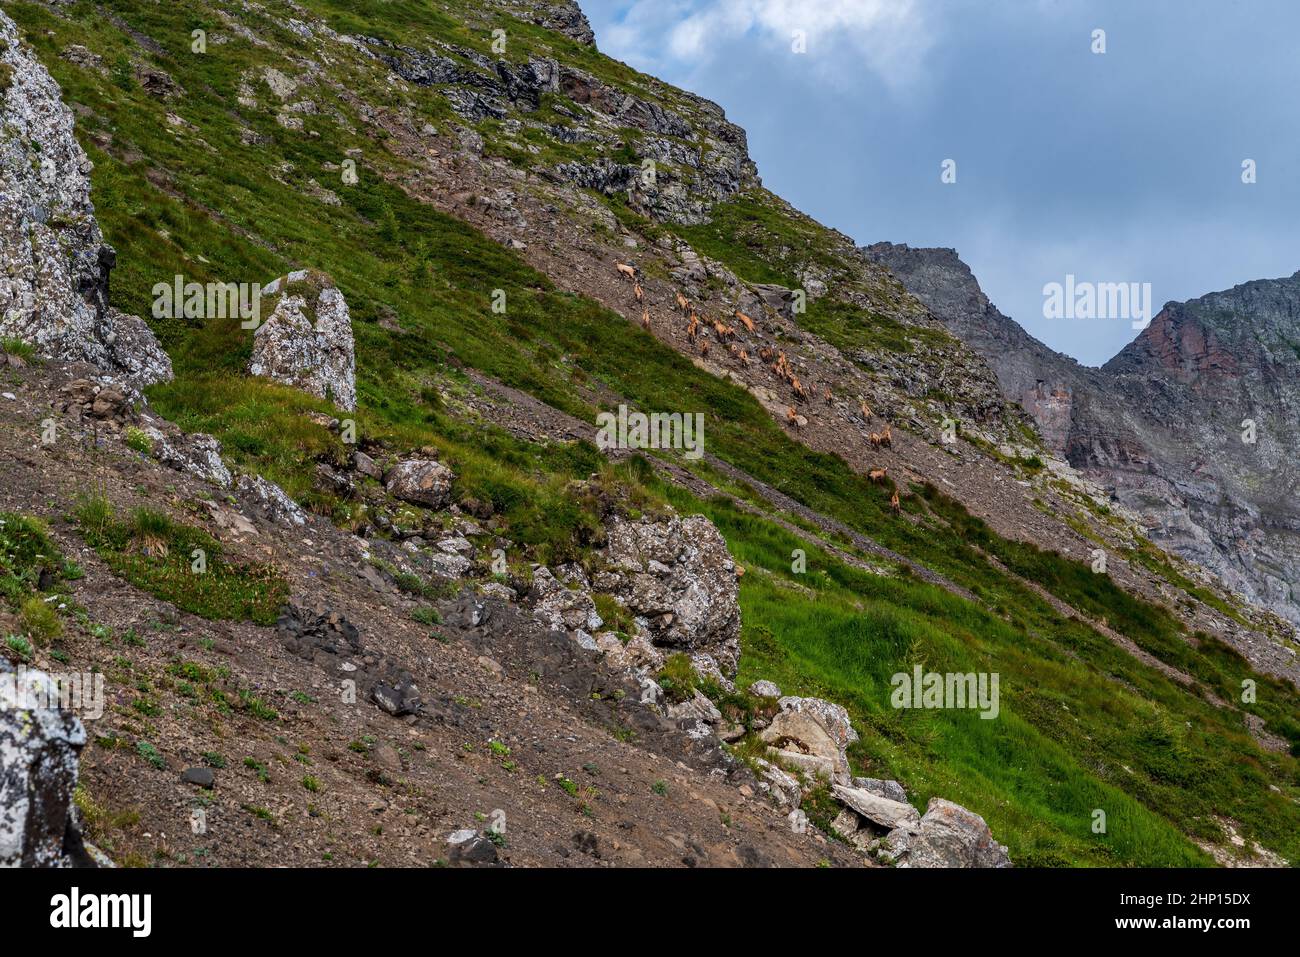 Herd of chamois on steep mountain sloupe covered by grass, debris and few stones bellow Col di Lana mountain peak summit in the Dolomites Stock Photo